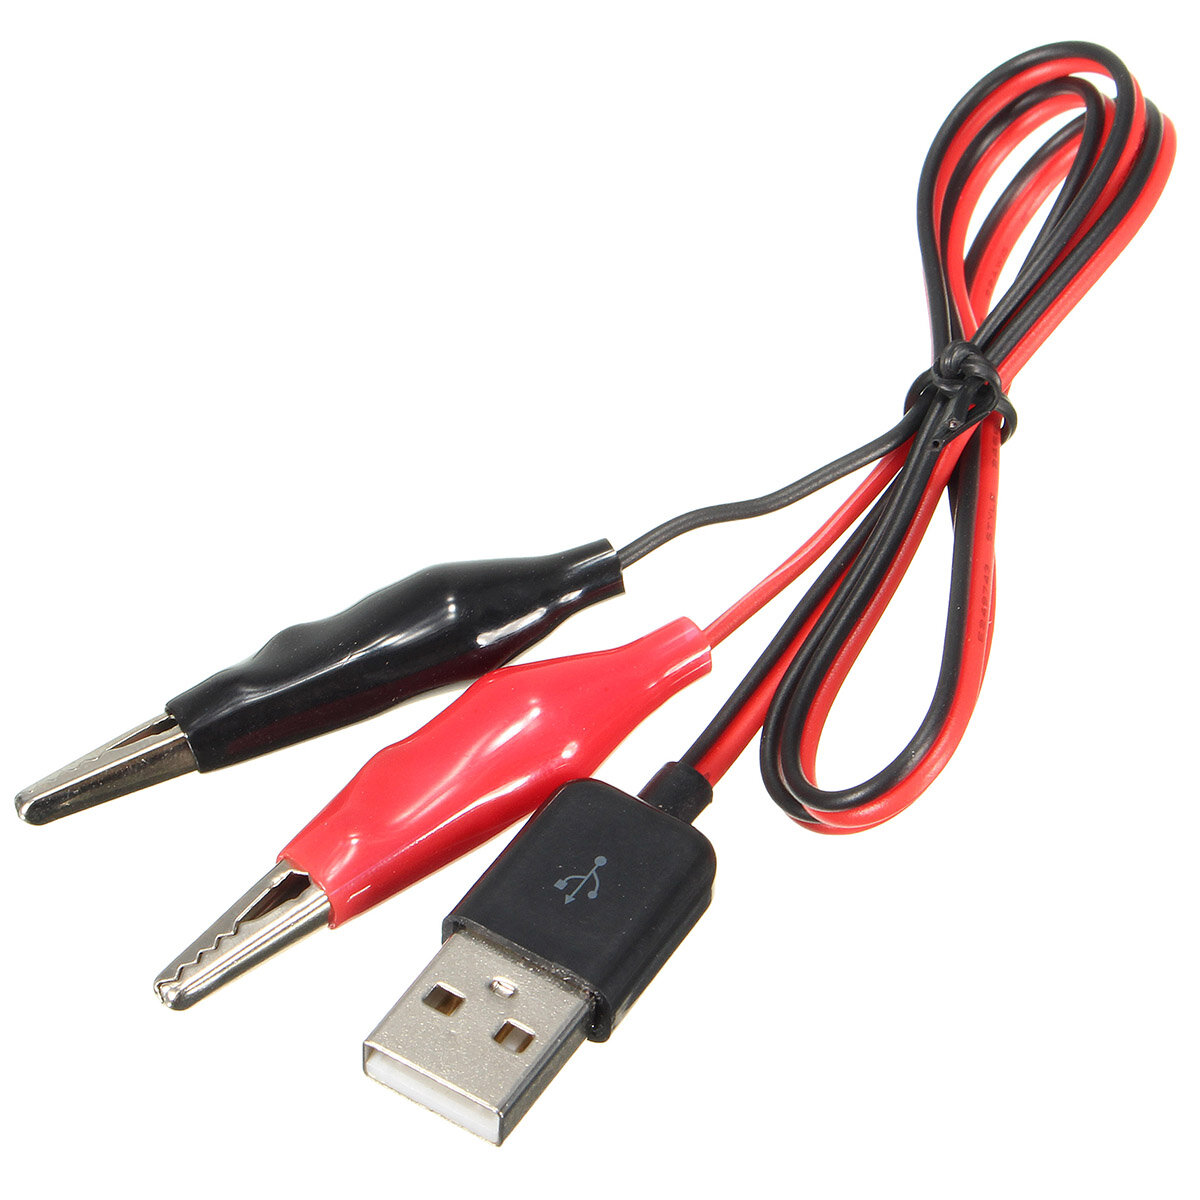 DANIU 60CM Alligator Test Clips Klem op USB Male Connector Power Adapter Cable Wire